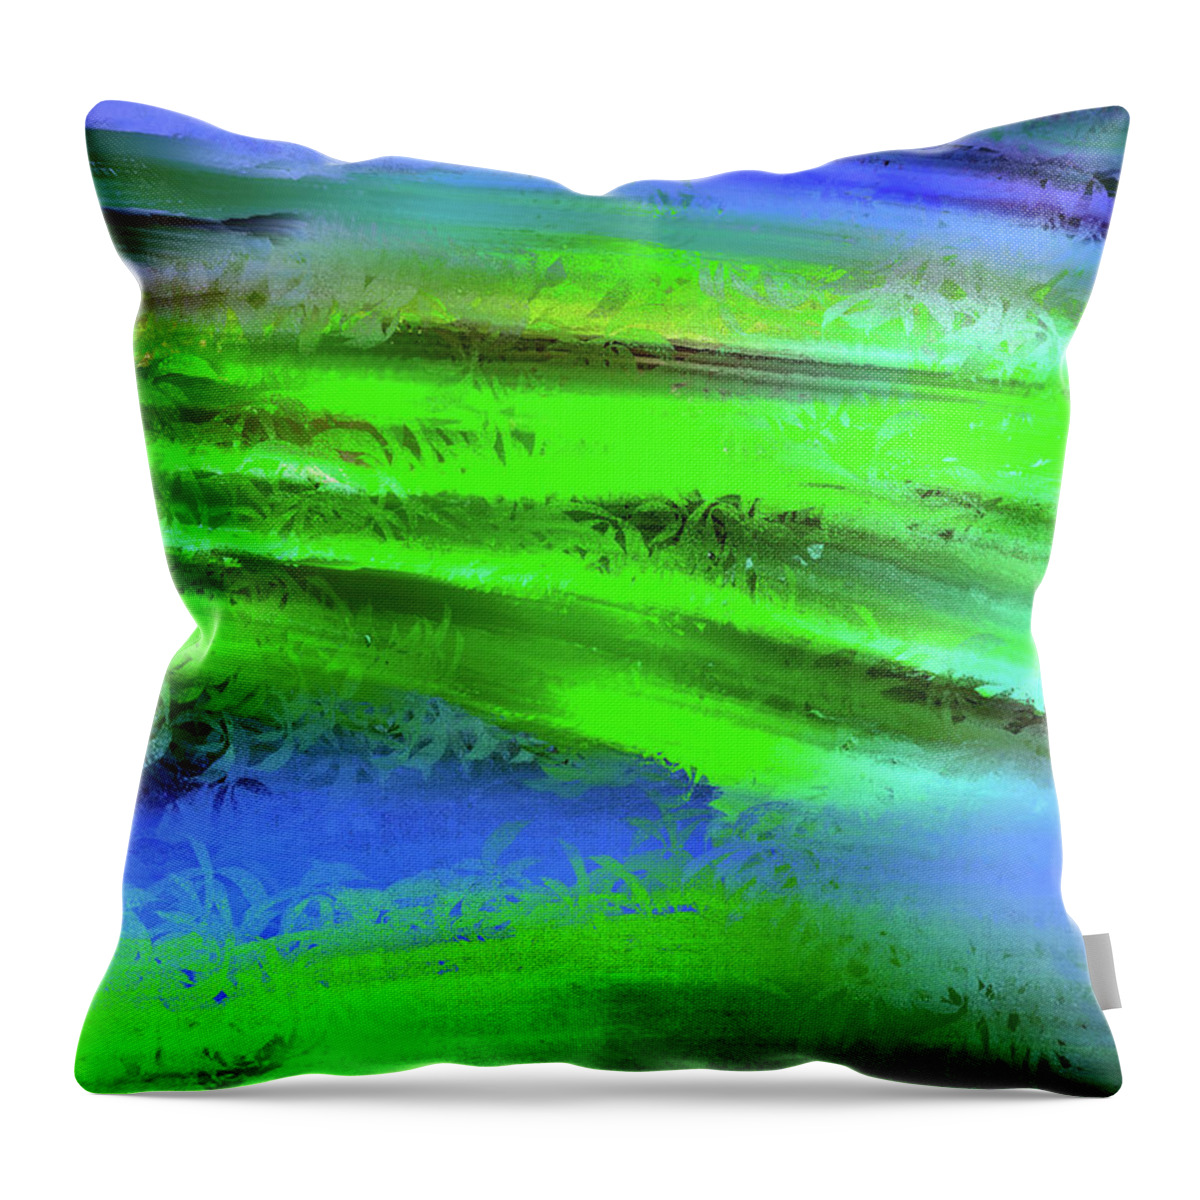 Landscape In Green And Blue Throw Pillow featuring the digital art Landscape in green and blue #j3 by Leif Sohlman